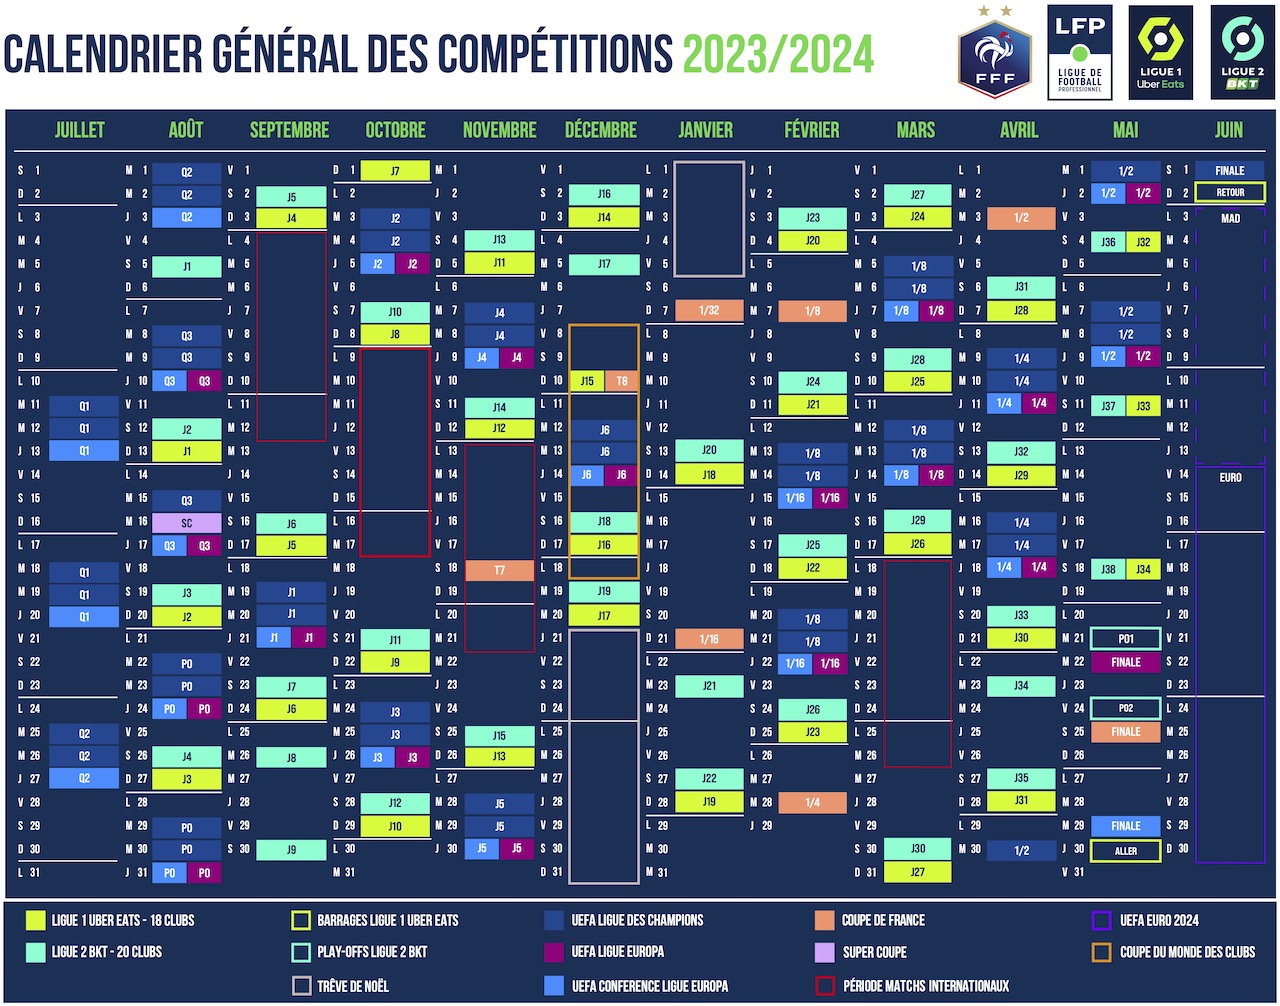 Football Calendrier Competition 2023 2024 